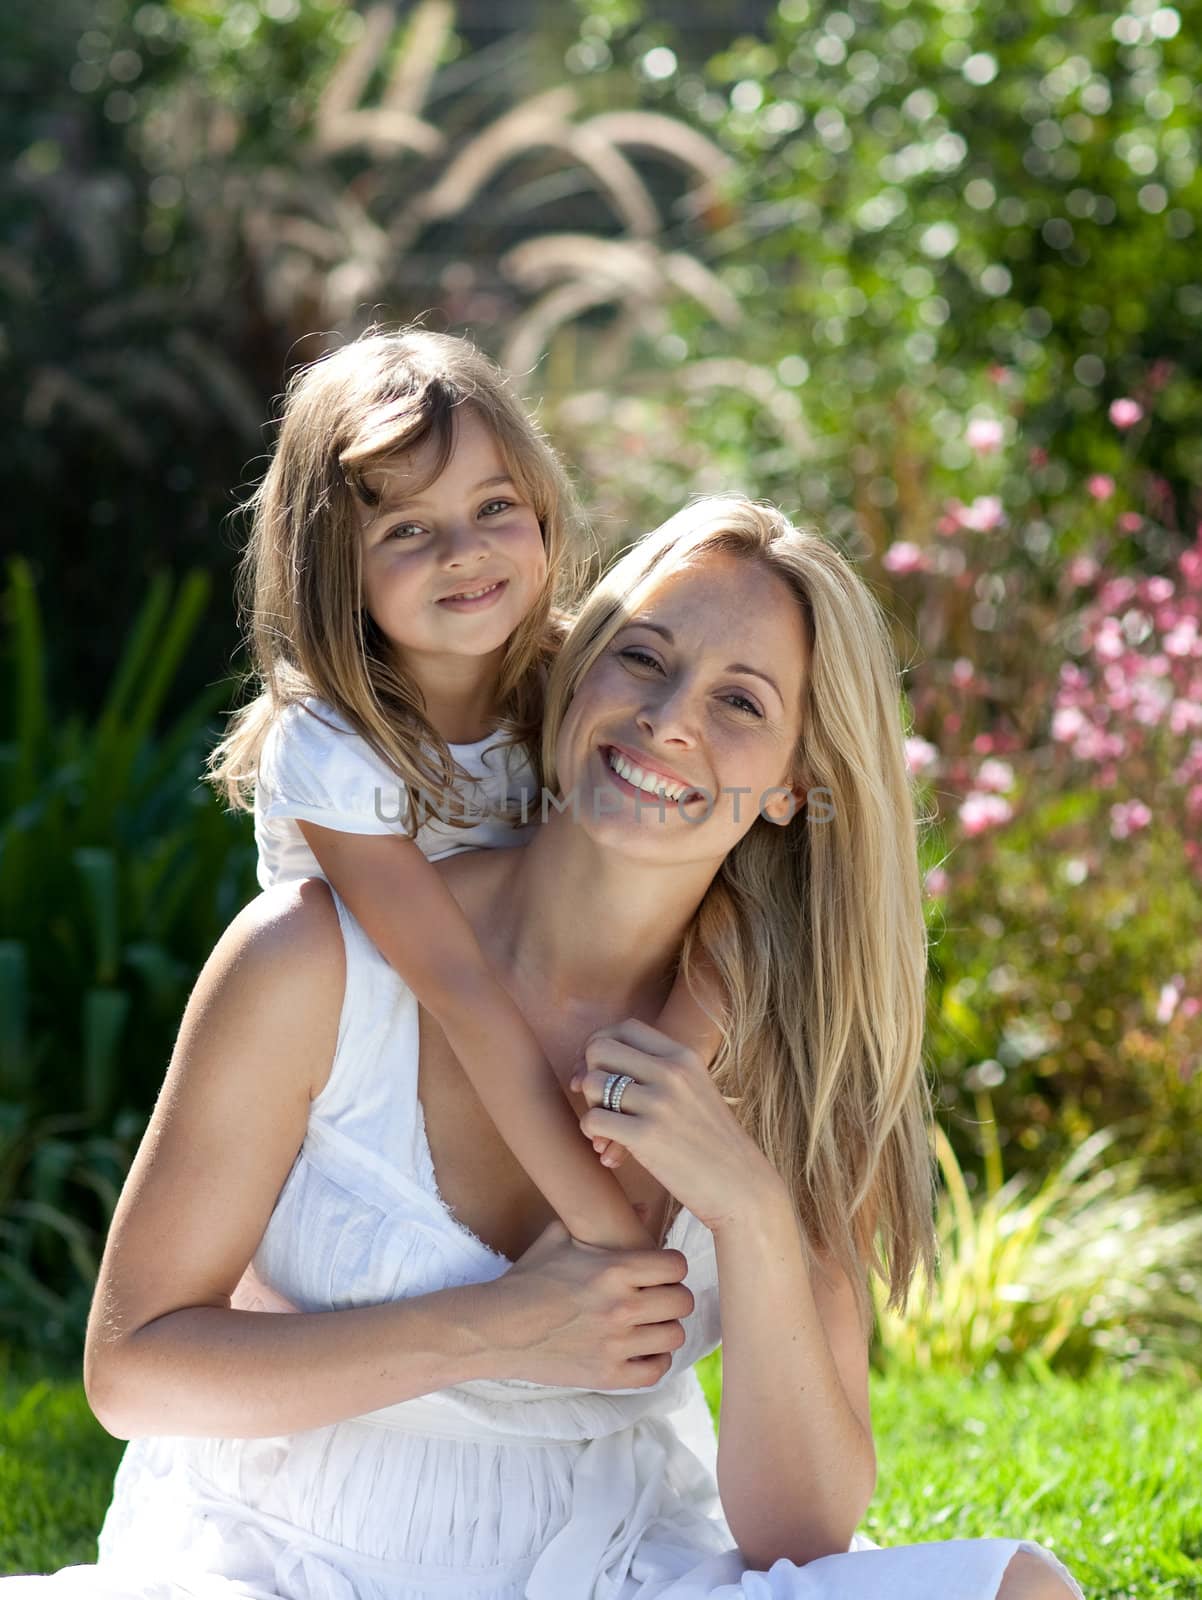 Beautiful mother and daughter outdoors in the sunshine playing in the garden